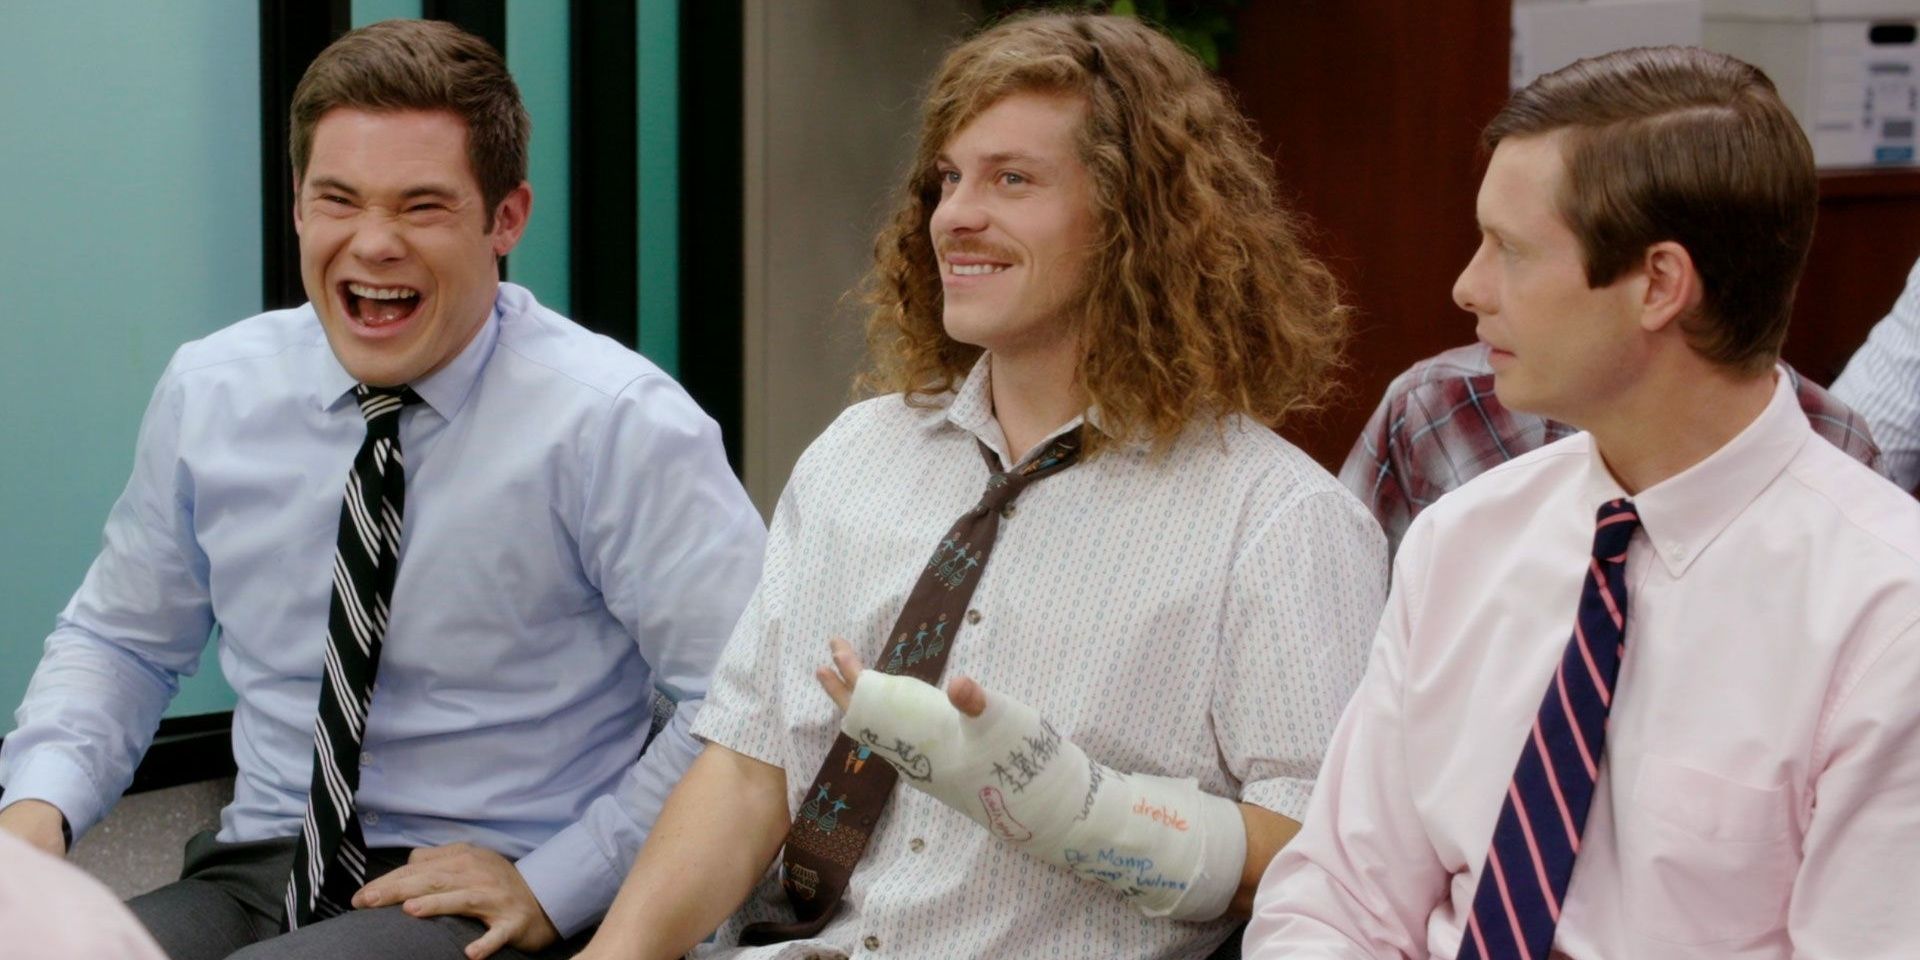 Three work buddies laughing and smiling in Workaholics 